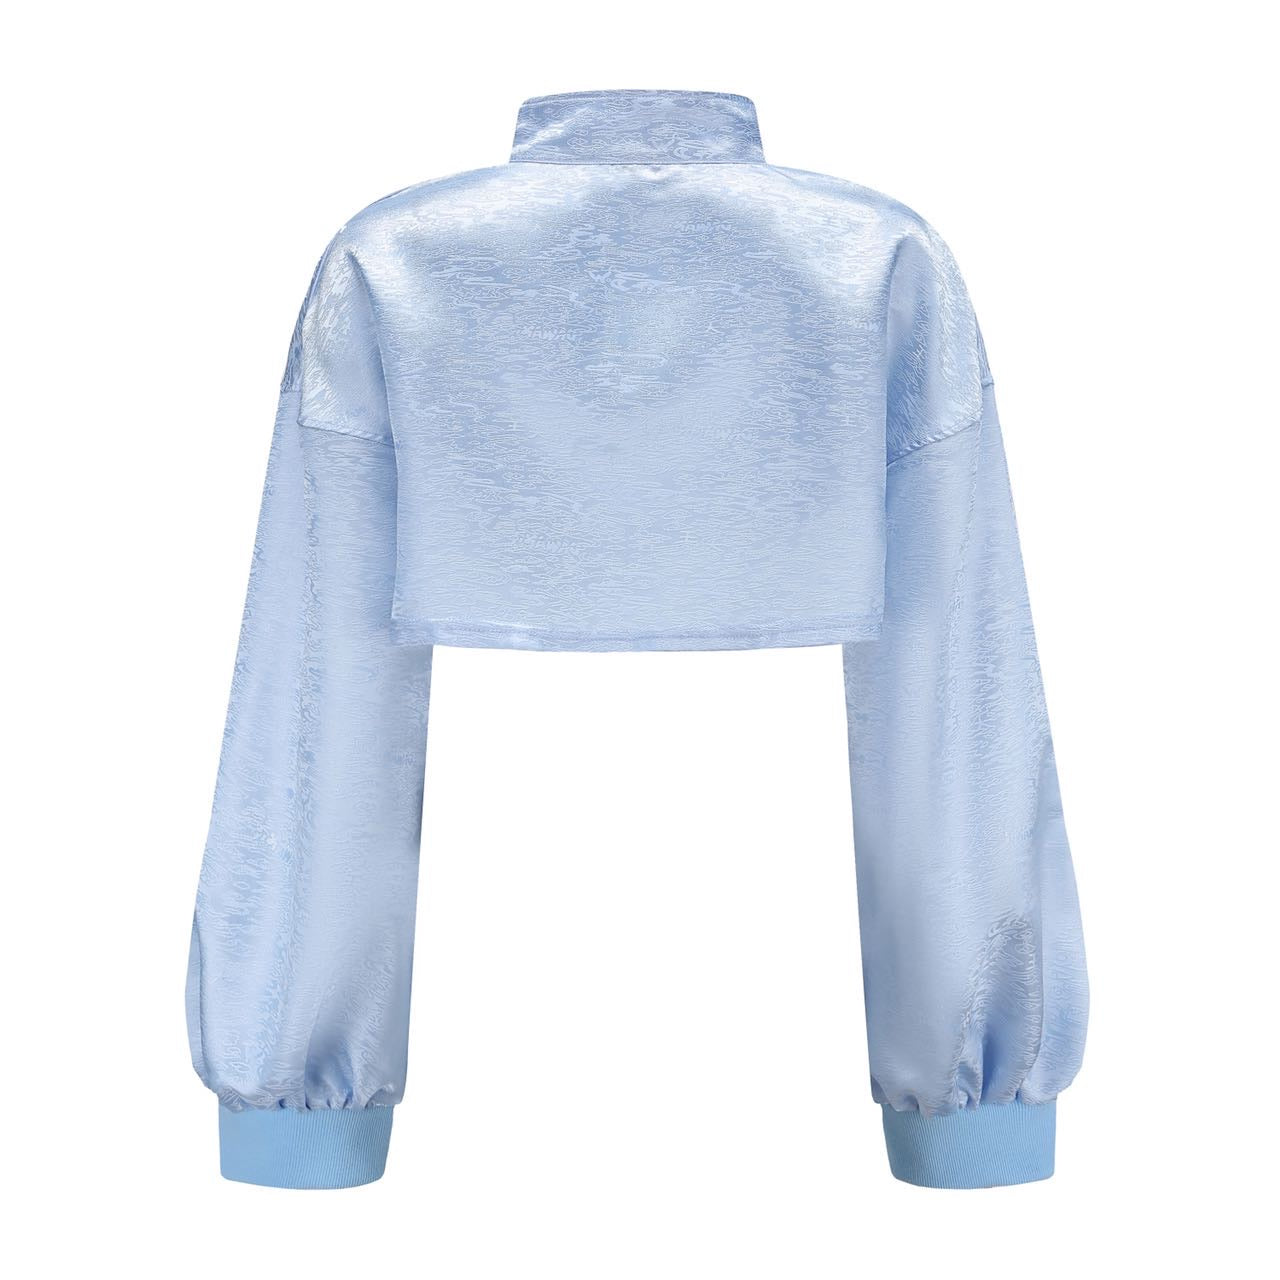 Hei Open Collar Crop Top, Drop Shoulder Oversized Fit, Contrast Color Piping, Center Front Knot Button, Brocade blue, back